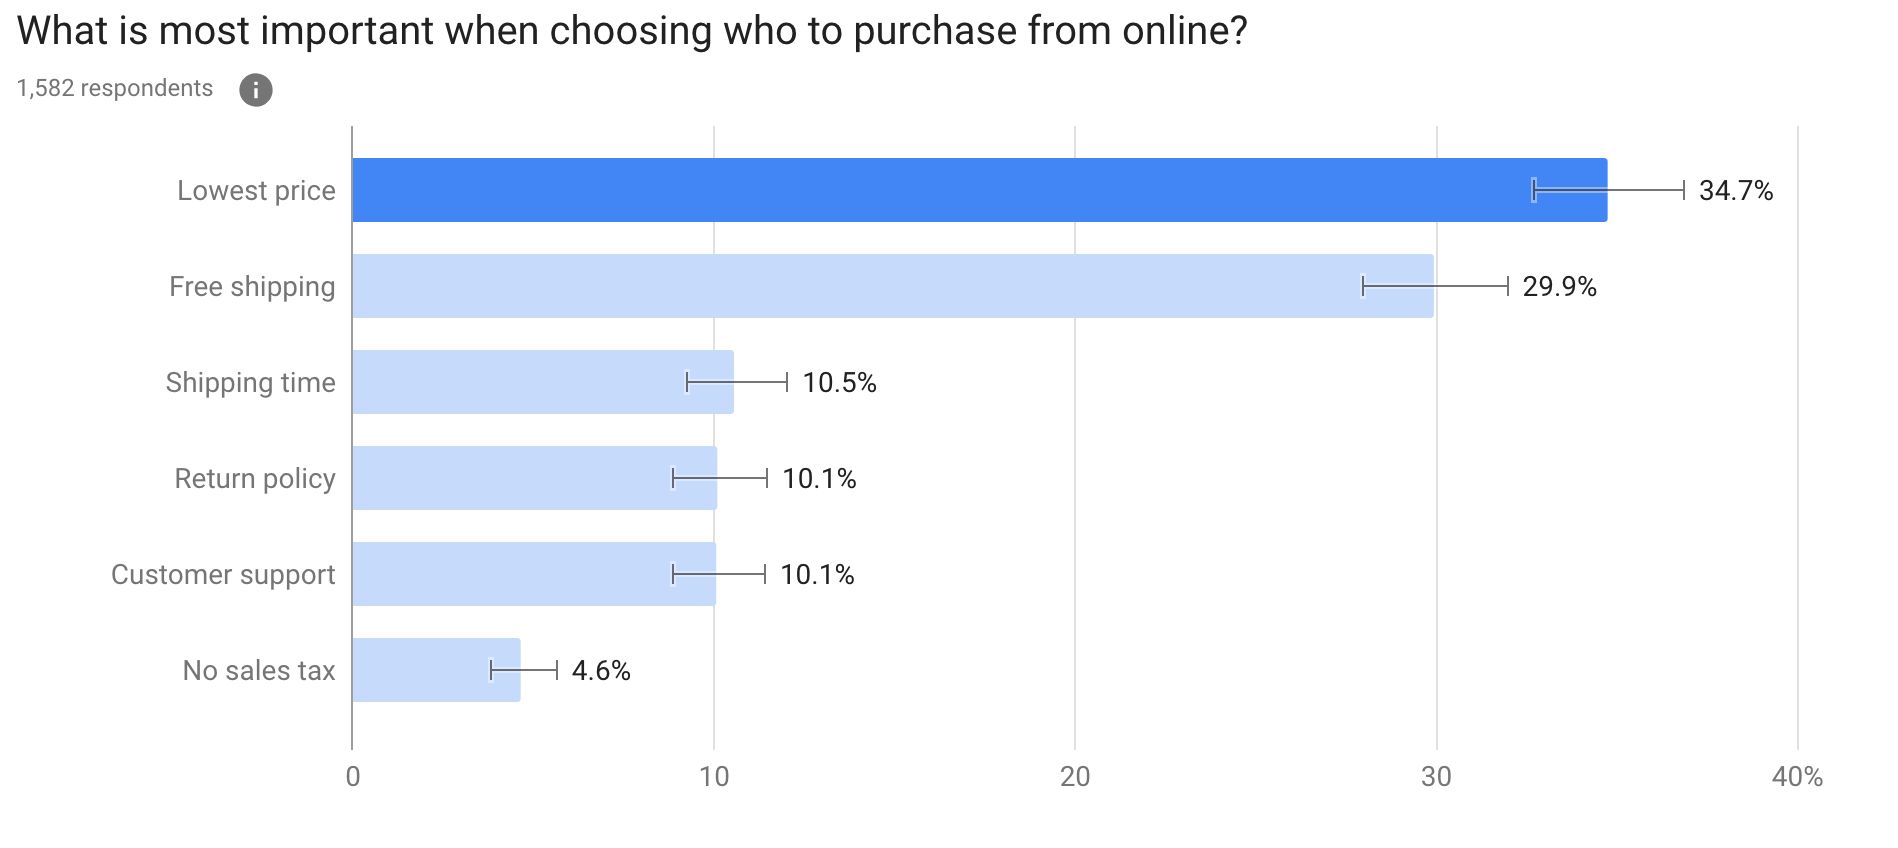 What is most important when choosing who to purchase from online?